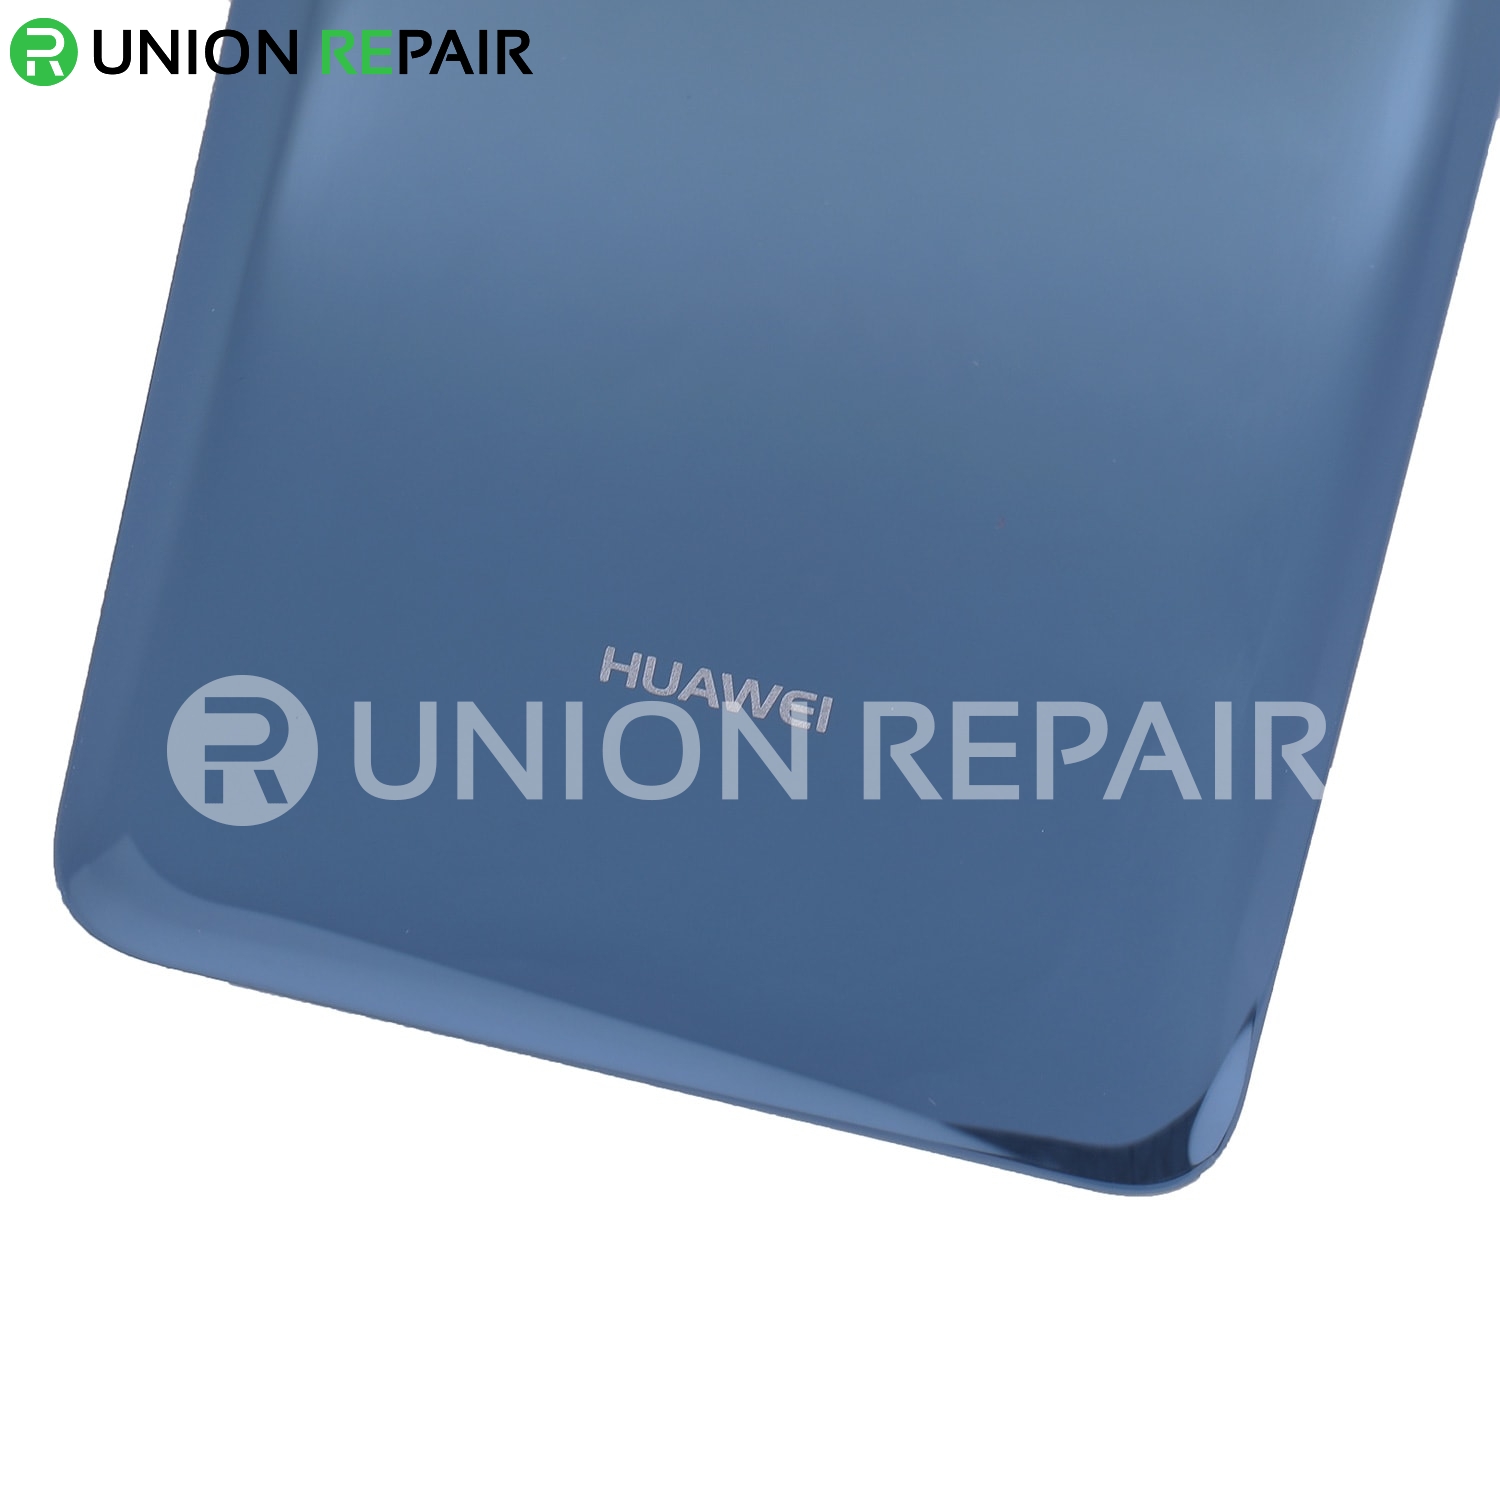 Replacement for Huawei Mate 10 Battery Door - Blue